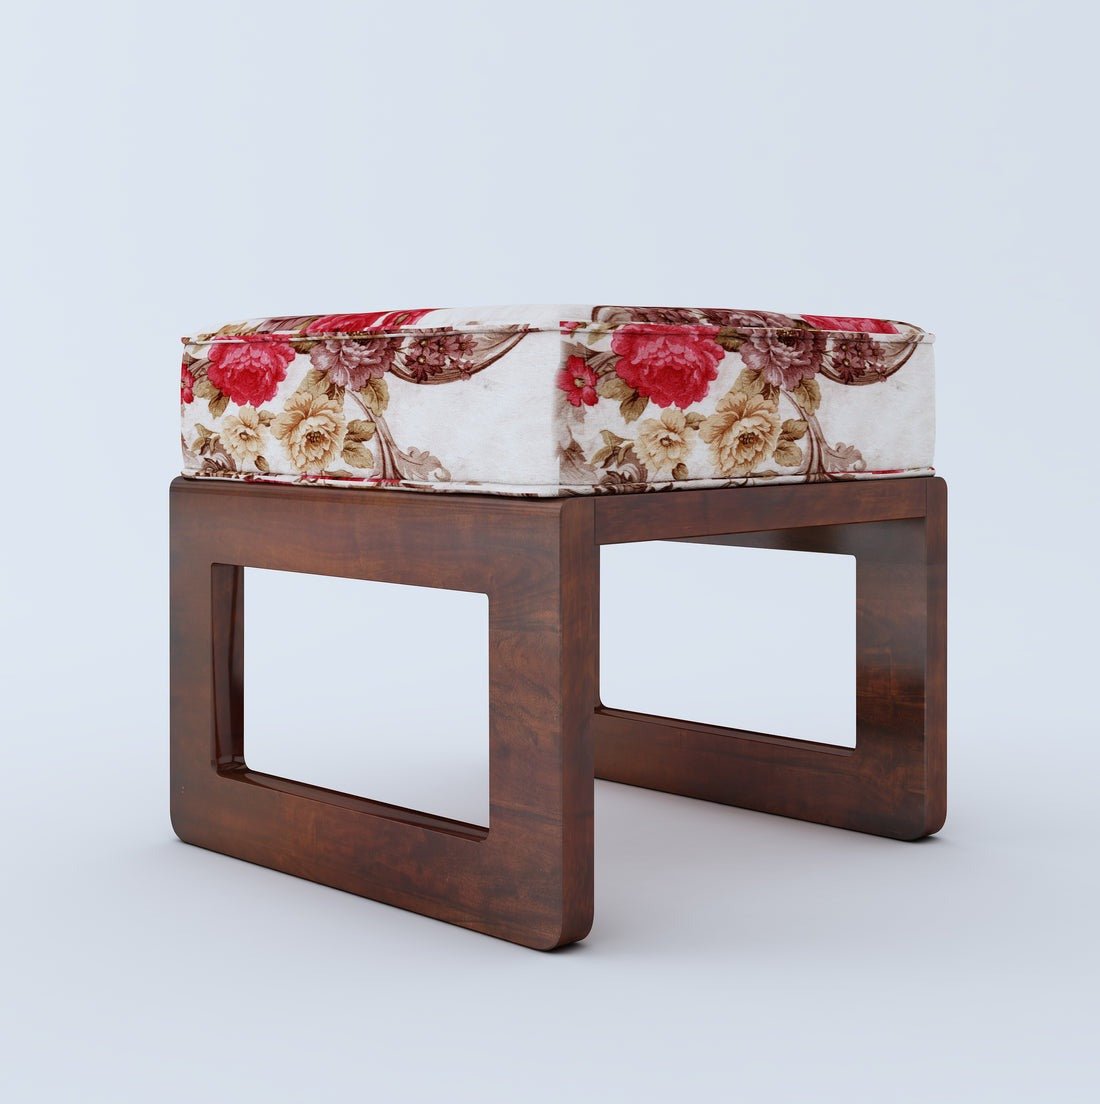 Vesta Solid Wood Coffee Table Centre Table With 4 Seating Stool For Living Room. - Torque India